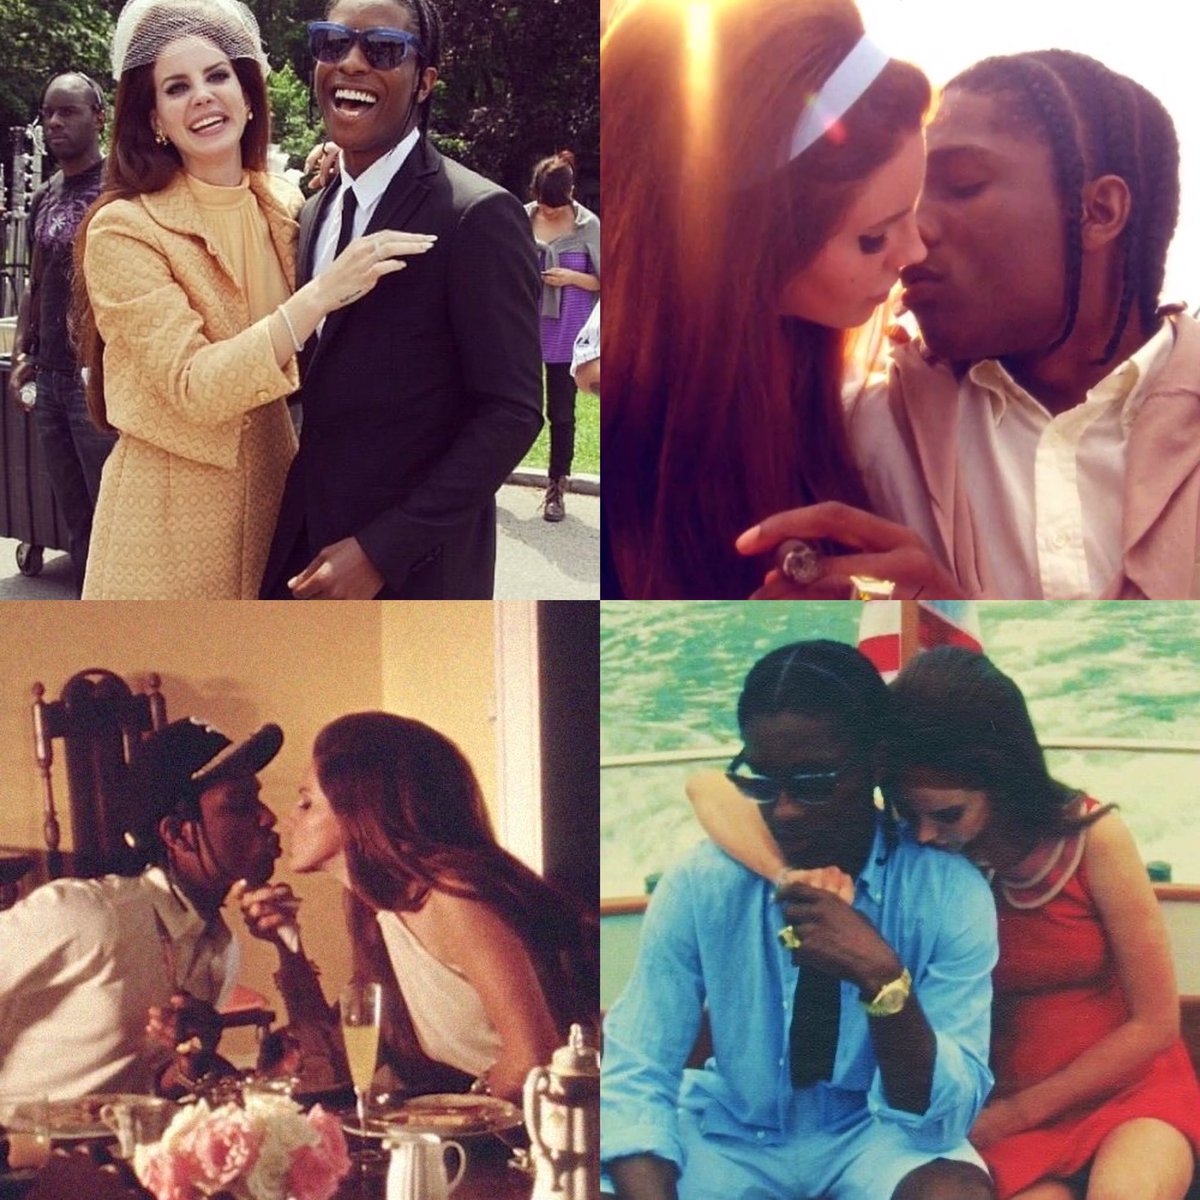 lana del rey and asap rocky as jackie and jf kennedy for the 'national anthem' mv